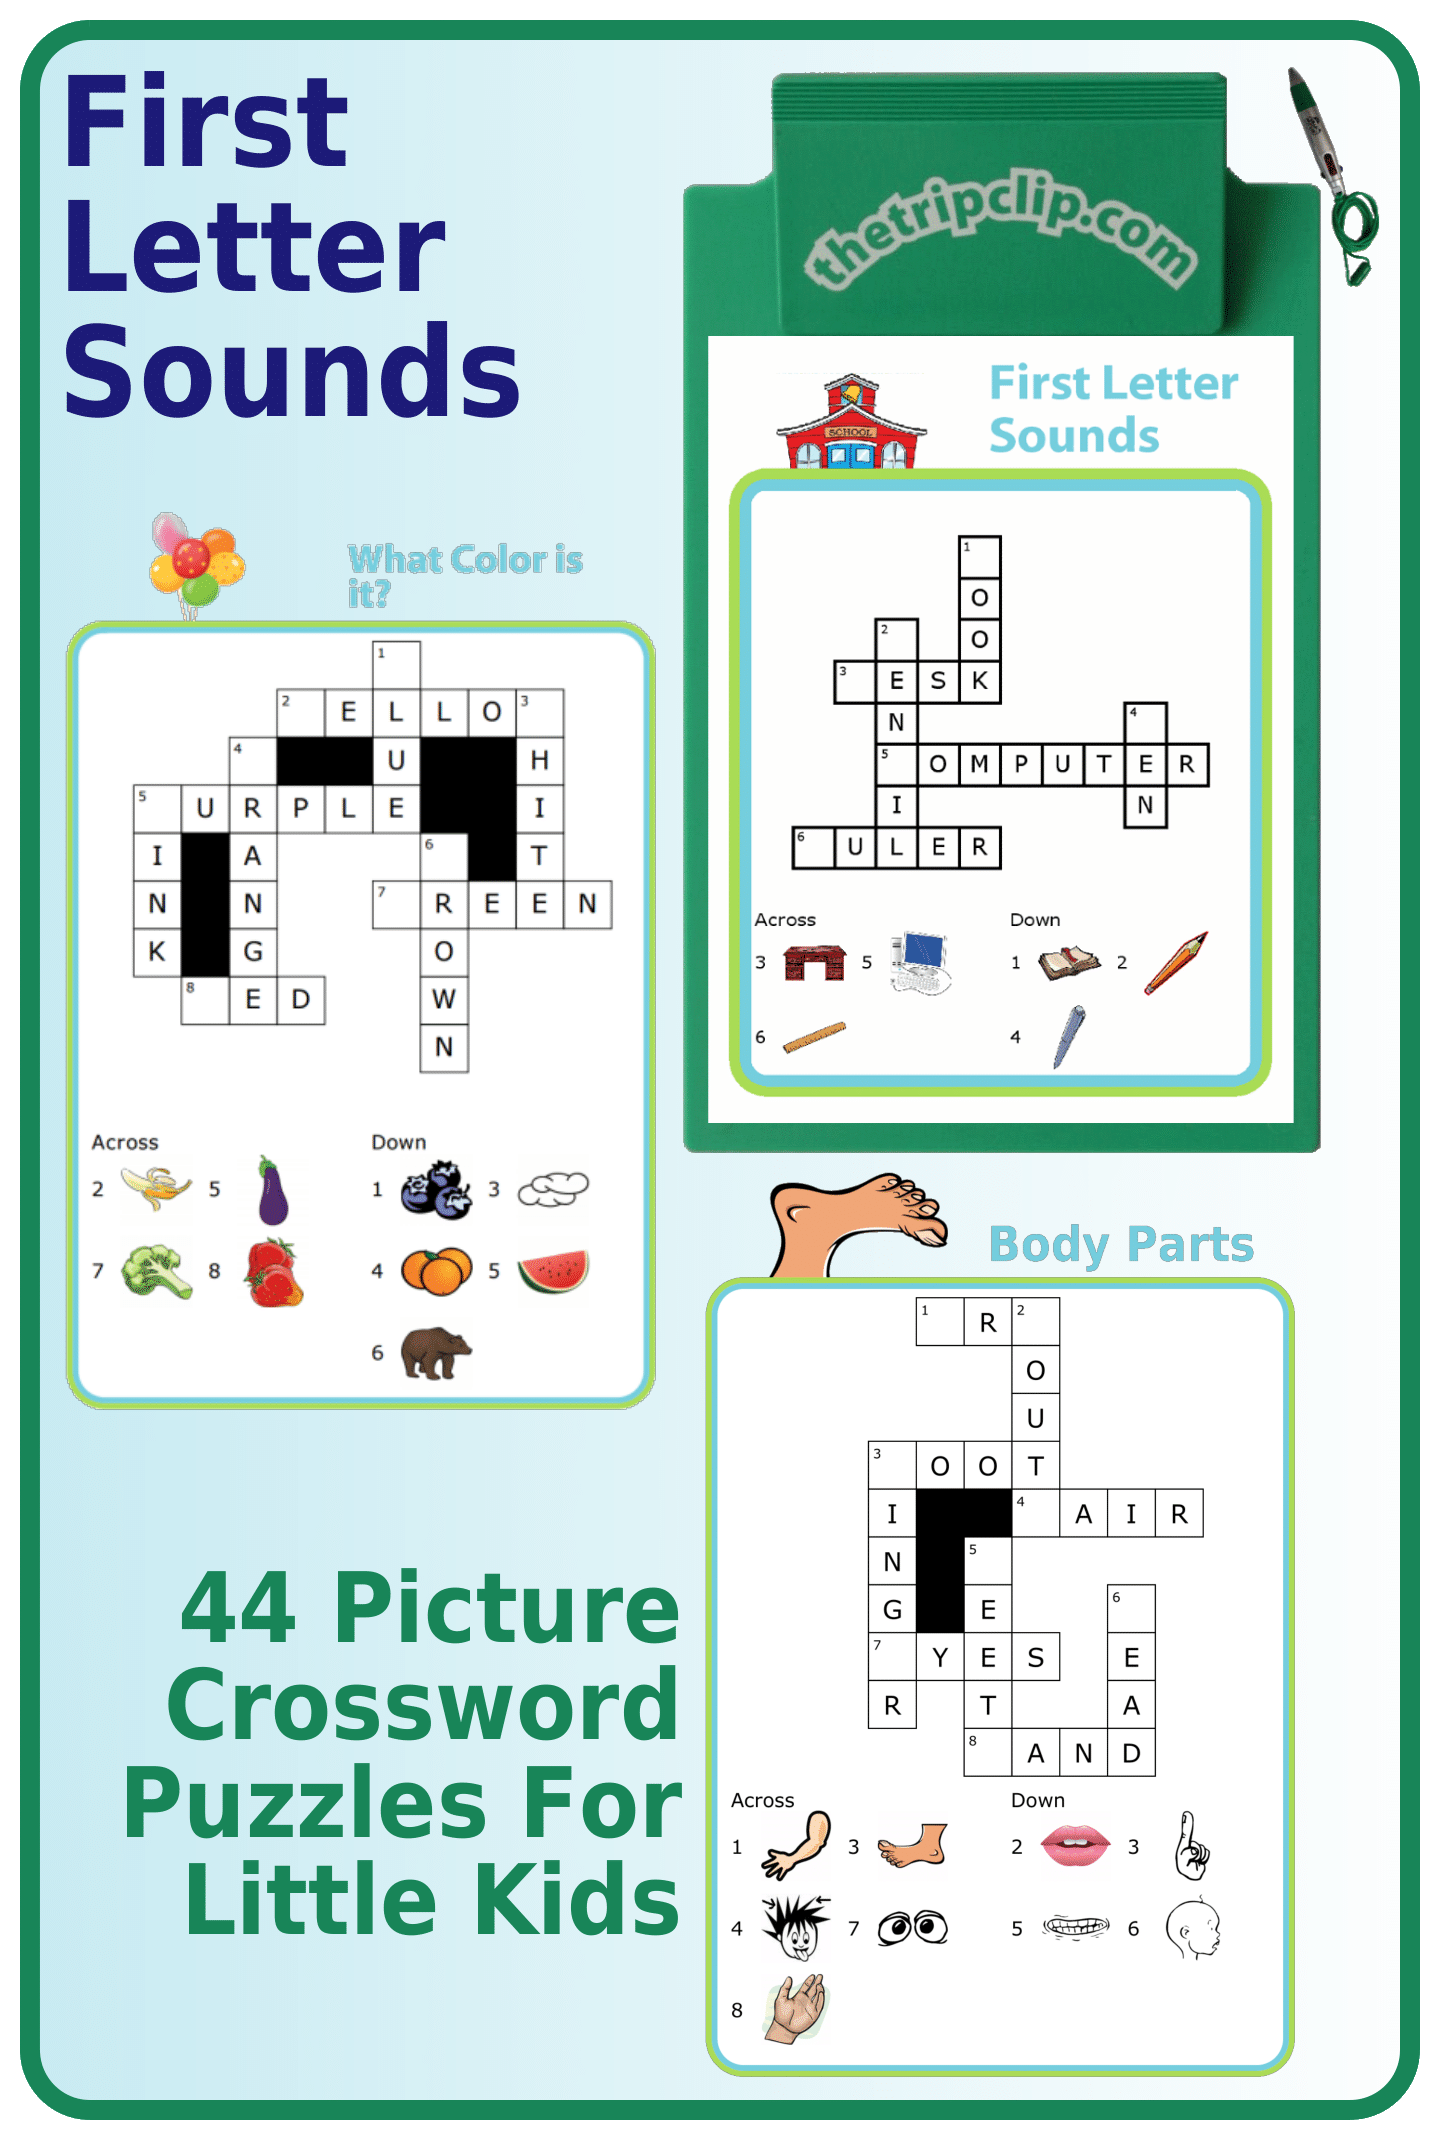 3 crossword puzzles with picture clues and only the first letter is missing